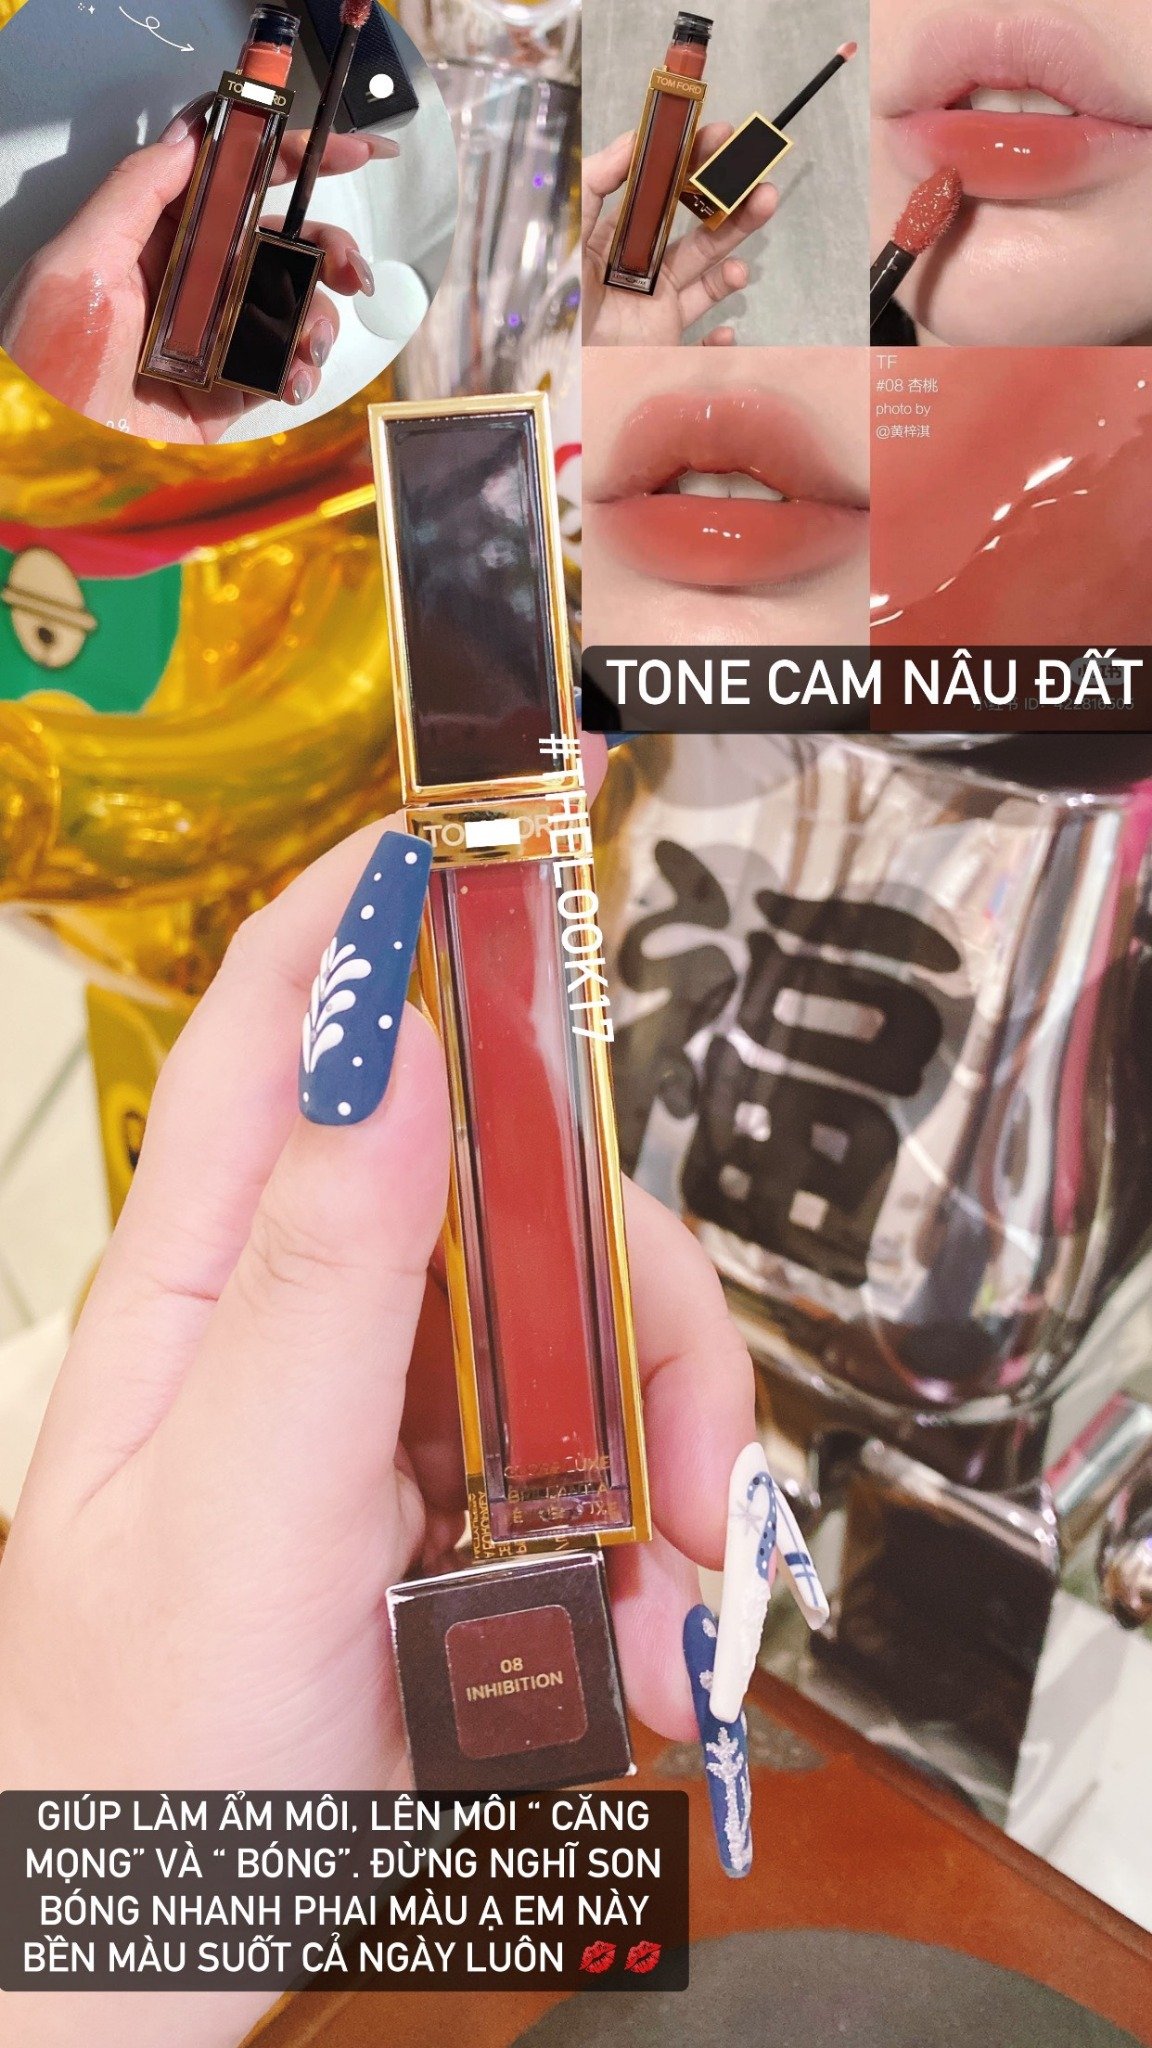 SON TOM FORD GLOSS LUXE #08 INHIBITION – Thelook17